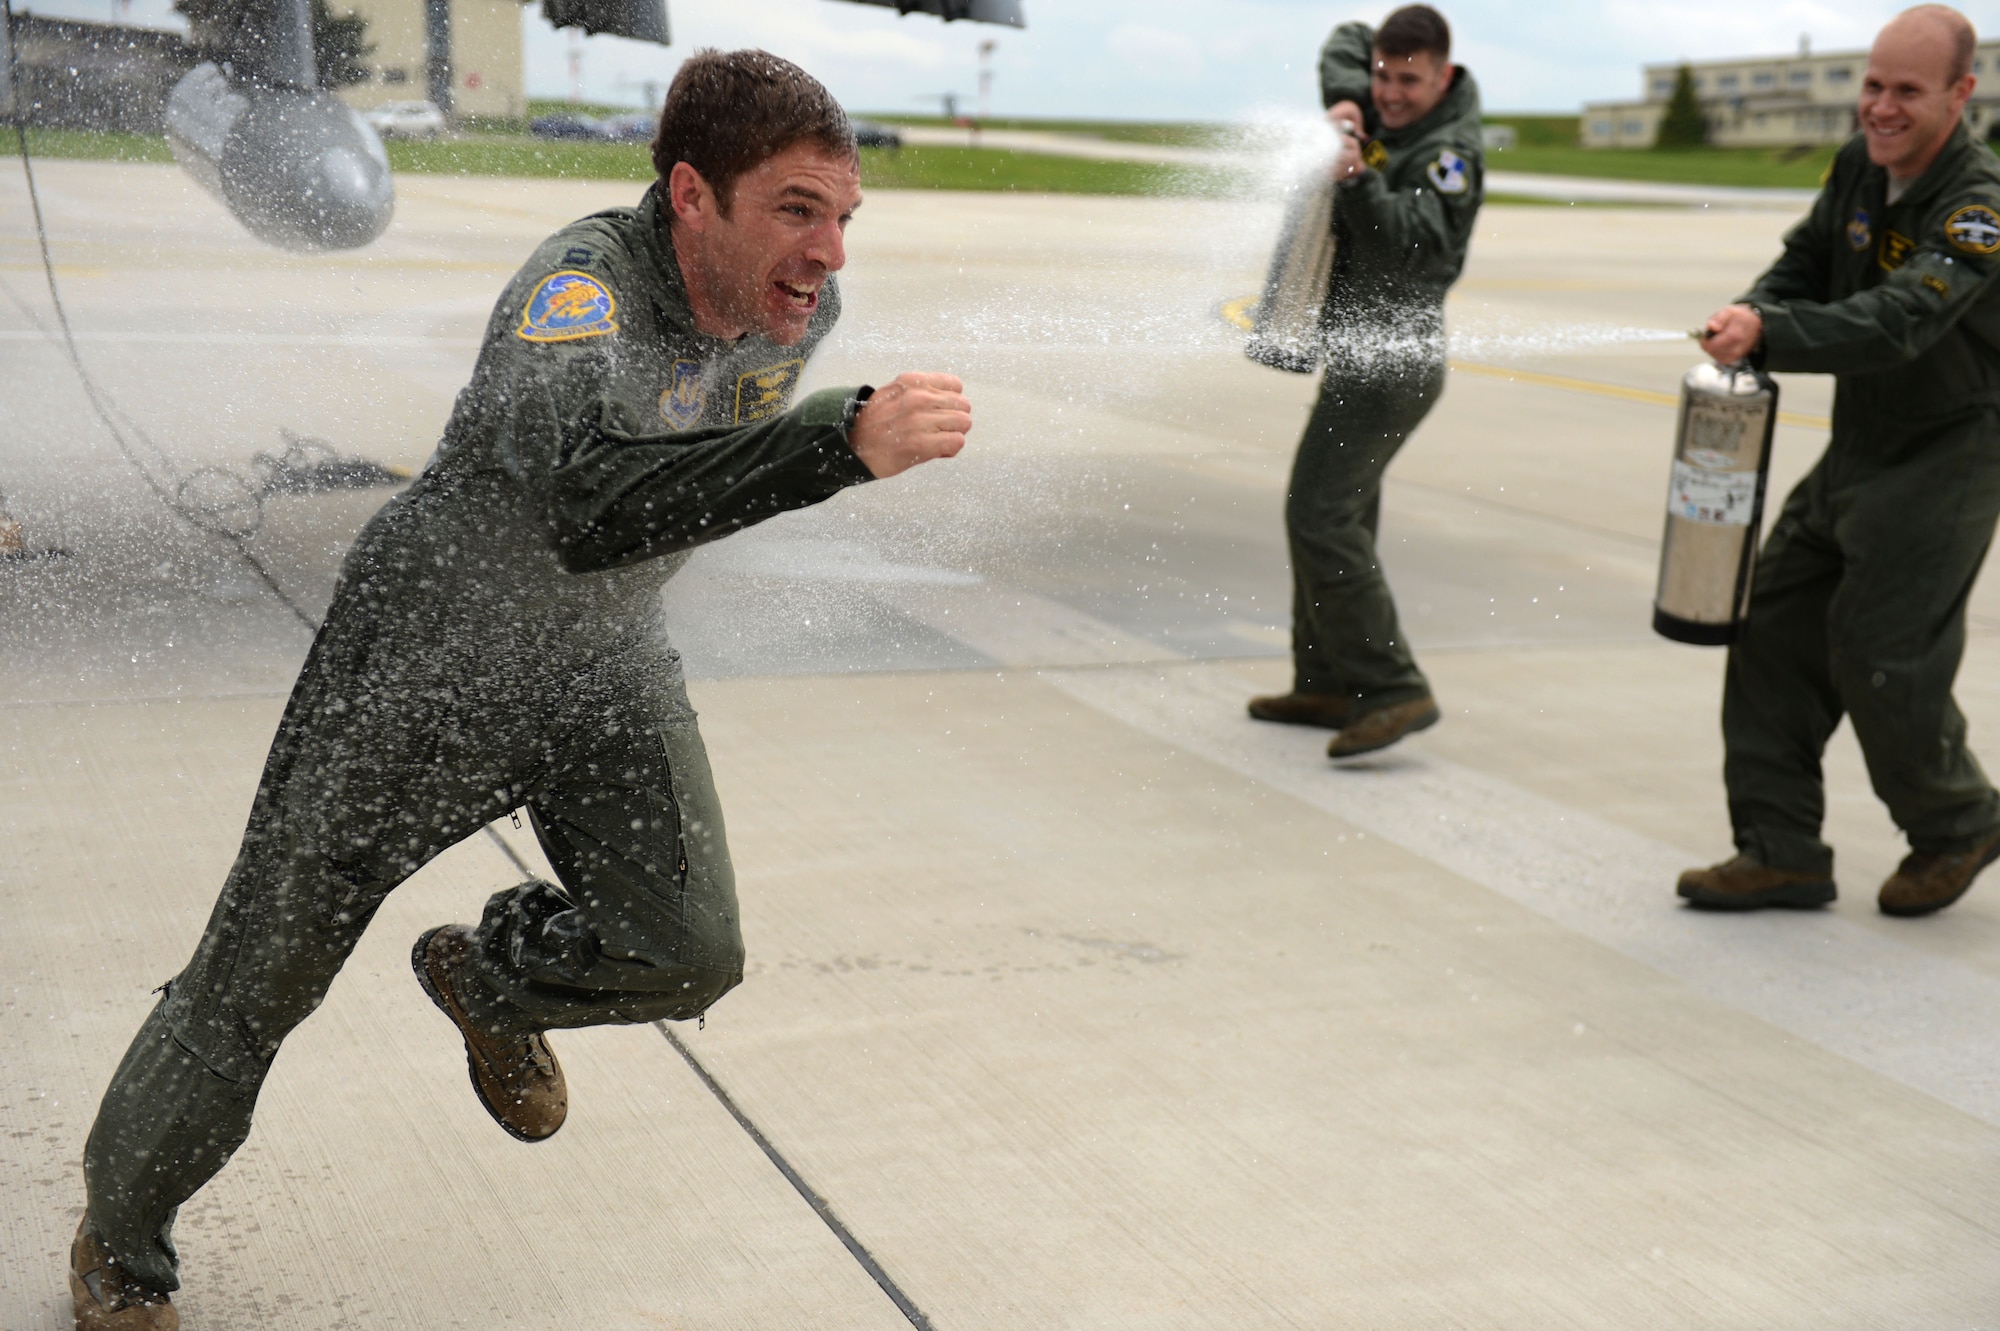 SPANGDAHLEM AIR BASE, Germany – U.S. Air Force Cap. Gregory Ulrich, 81st Fighter Squadron pilot from Fairfield, Calif., runs through a celebratory stream of water after the last A-10 Thunderbolt II attack aircraft tactical sortie at Spangdahlem AB May 14, 2013. The celebration marked the end of 20 years of A-10 operations on Spangdahlem AB. (U.S. Air Force photo by Airman 1st Class Gustavo Castillo/Released)
